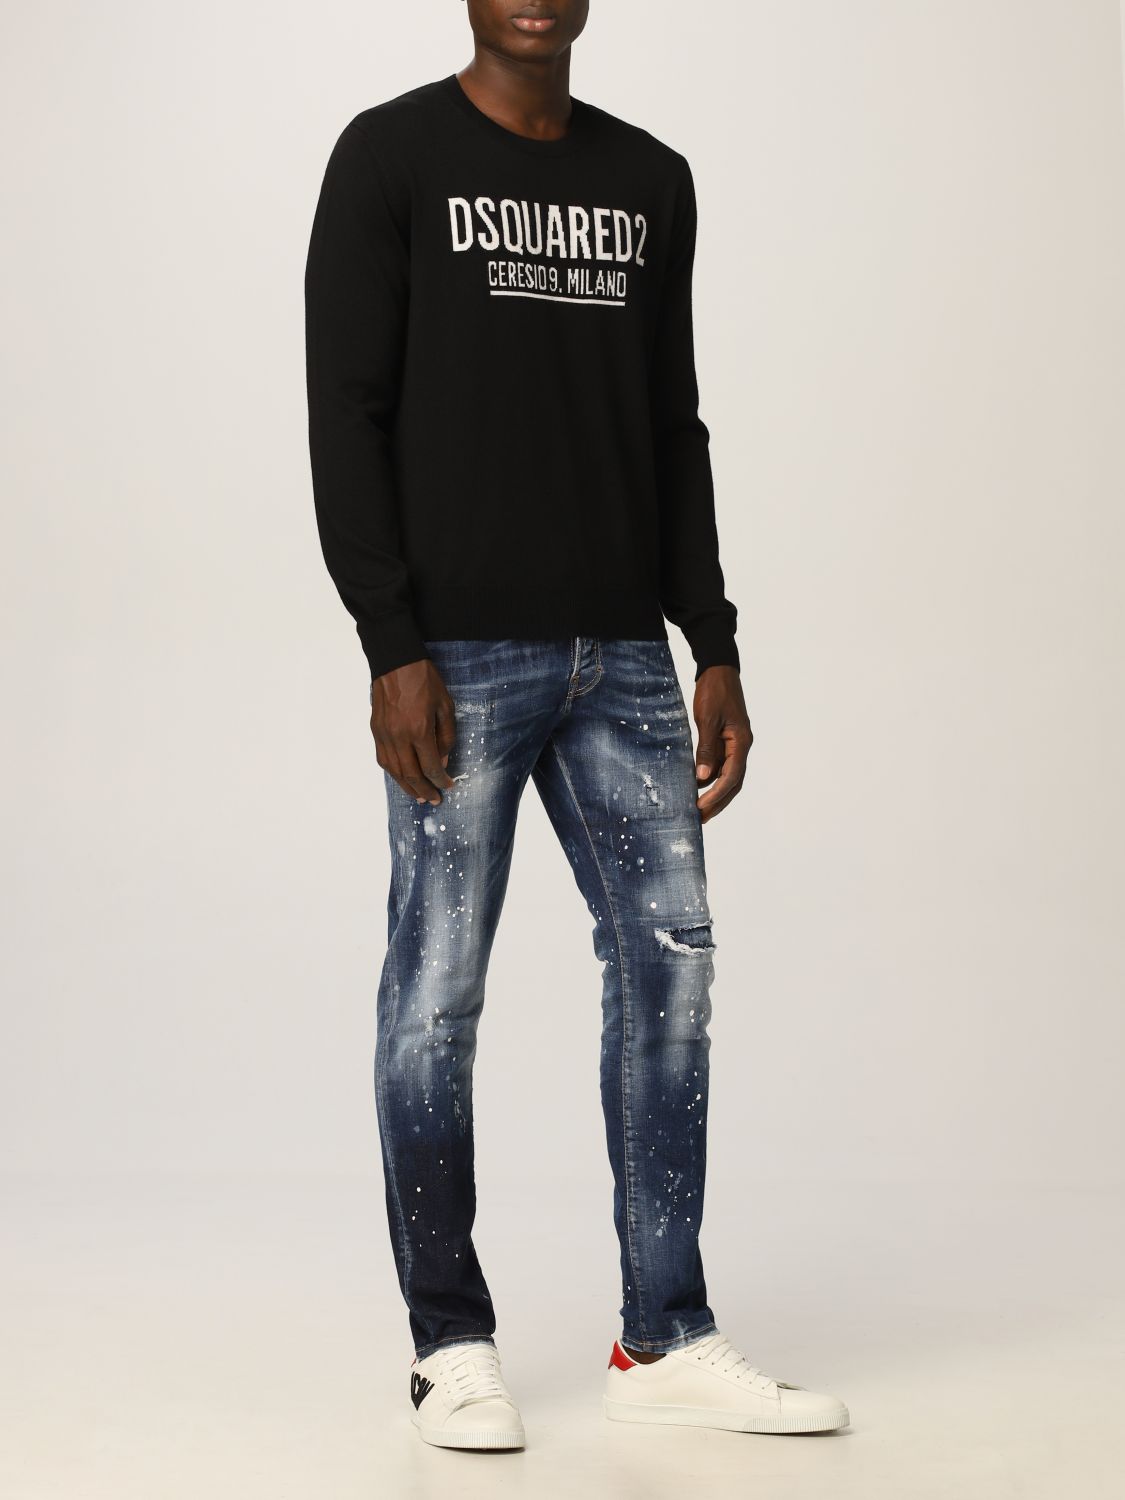 Jersey Dsquared2: Jersey hombre Dsquared2 negro 2